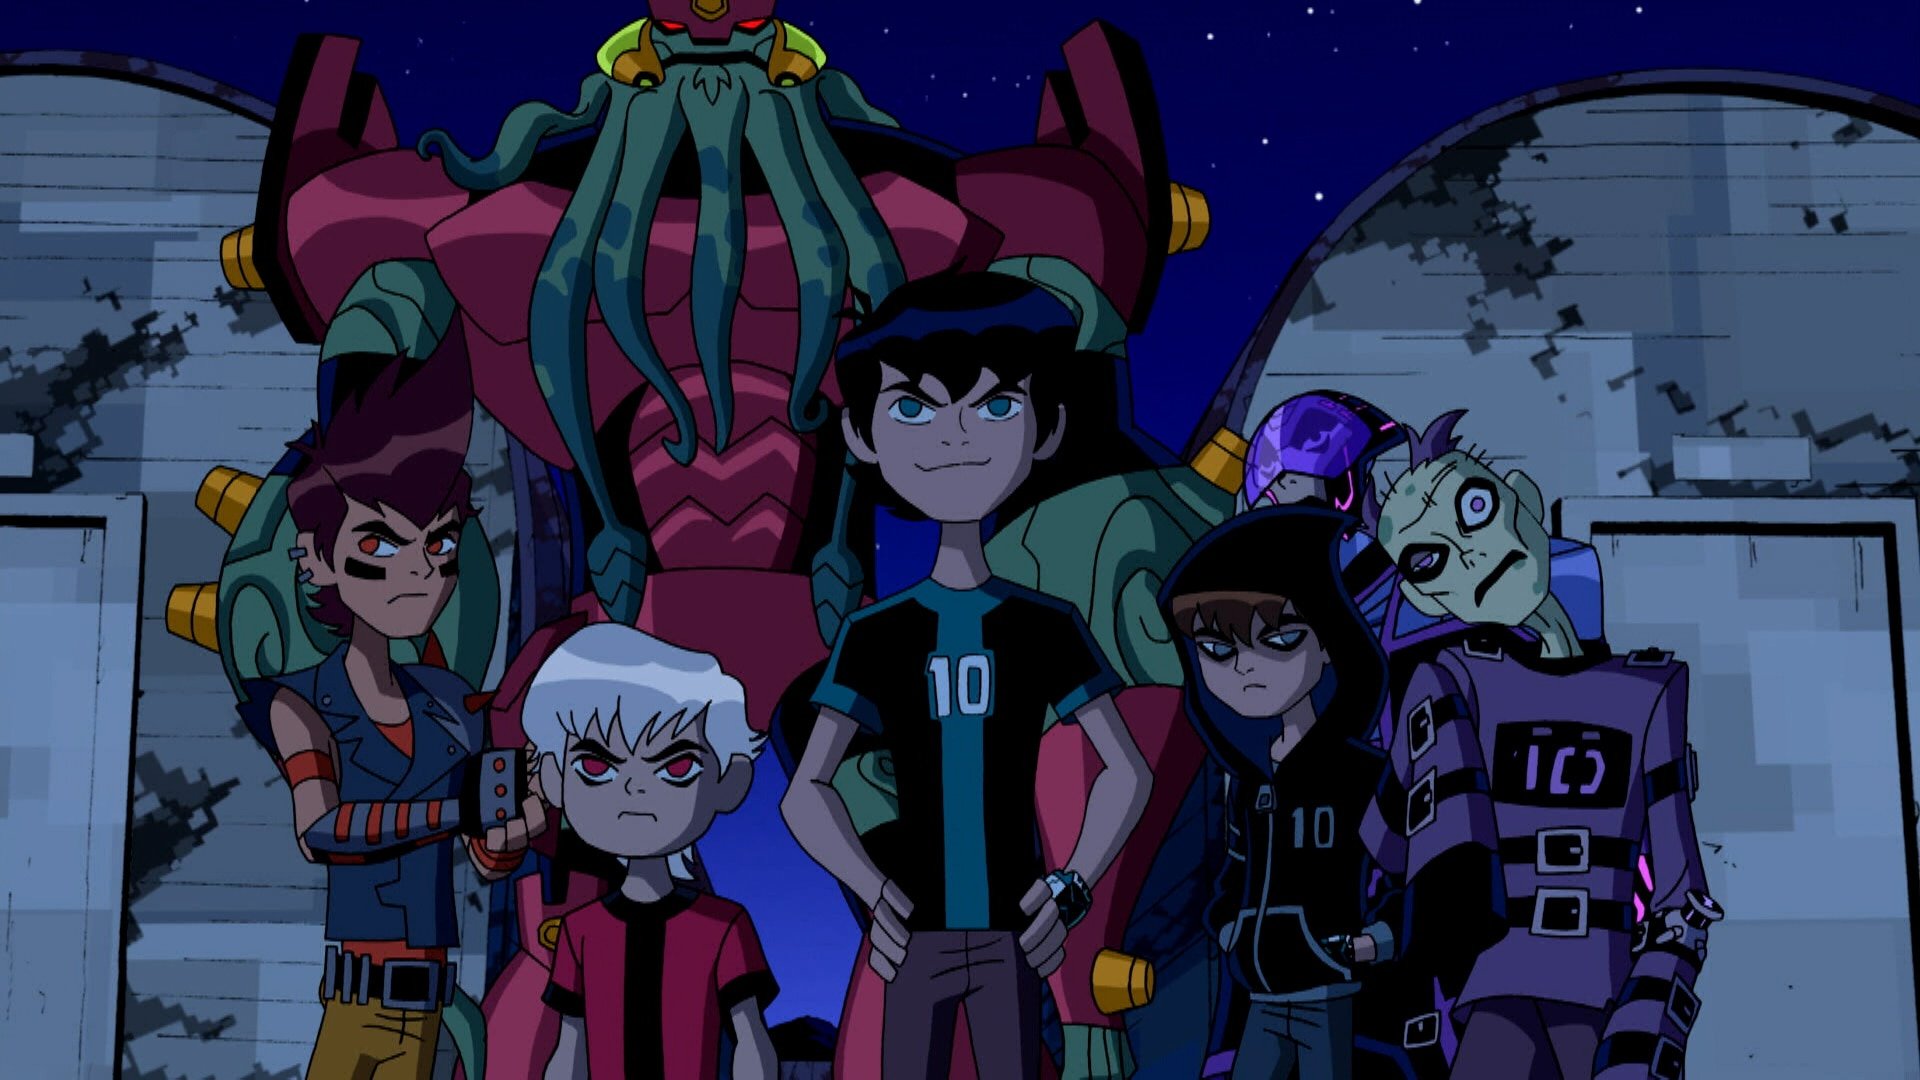 Will there be any Ben 10 show continuing the story of Omniverse